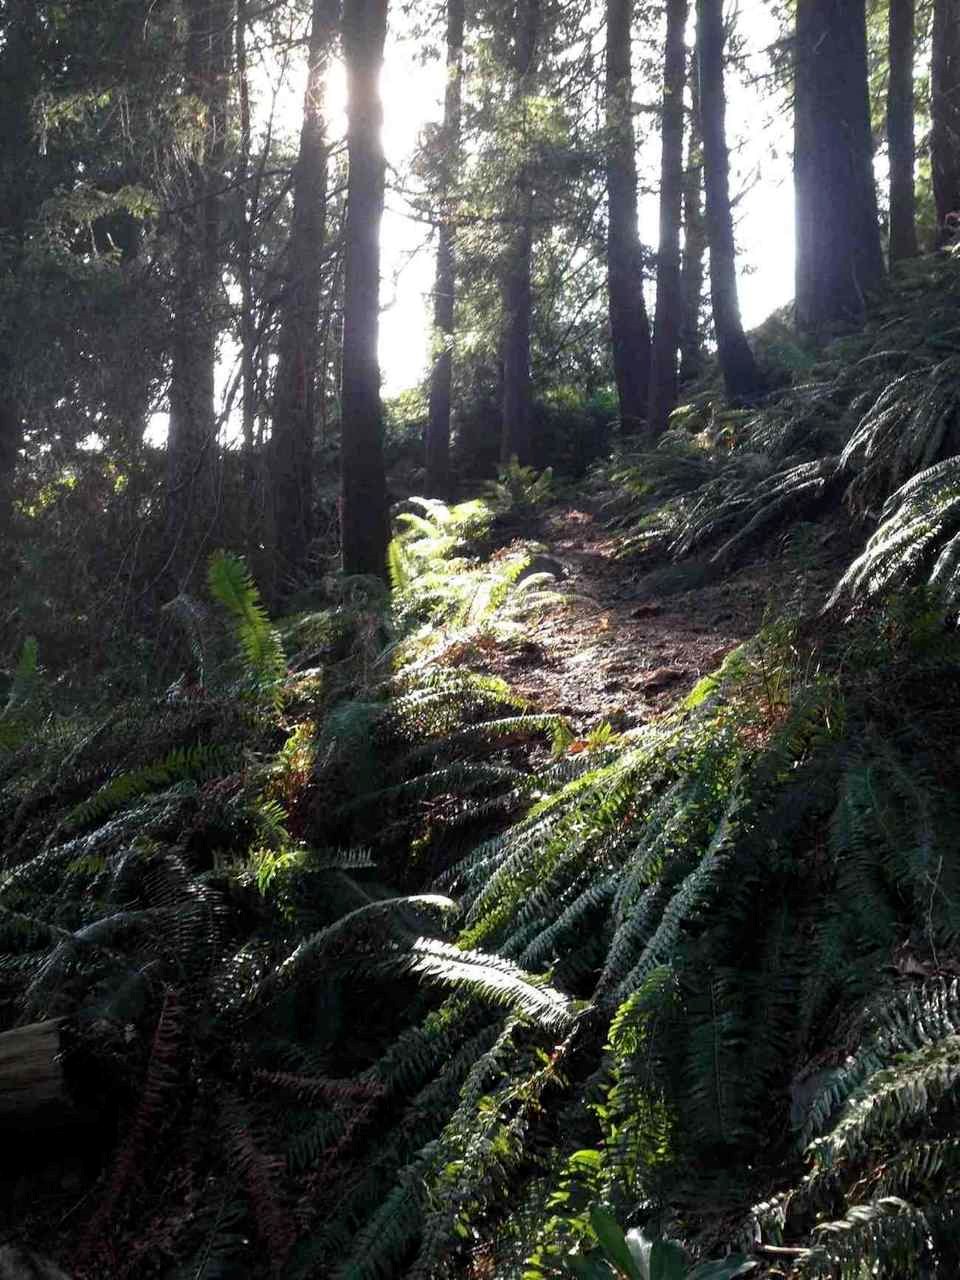  Cedars and ferns on the ravine slope.